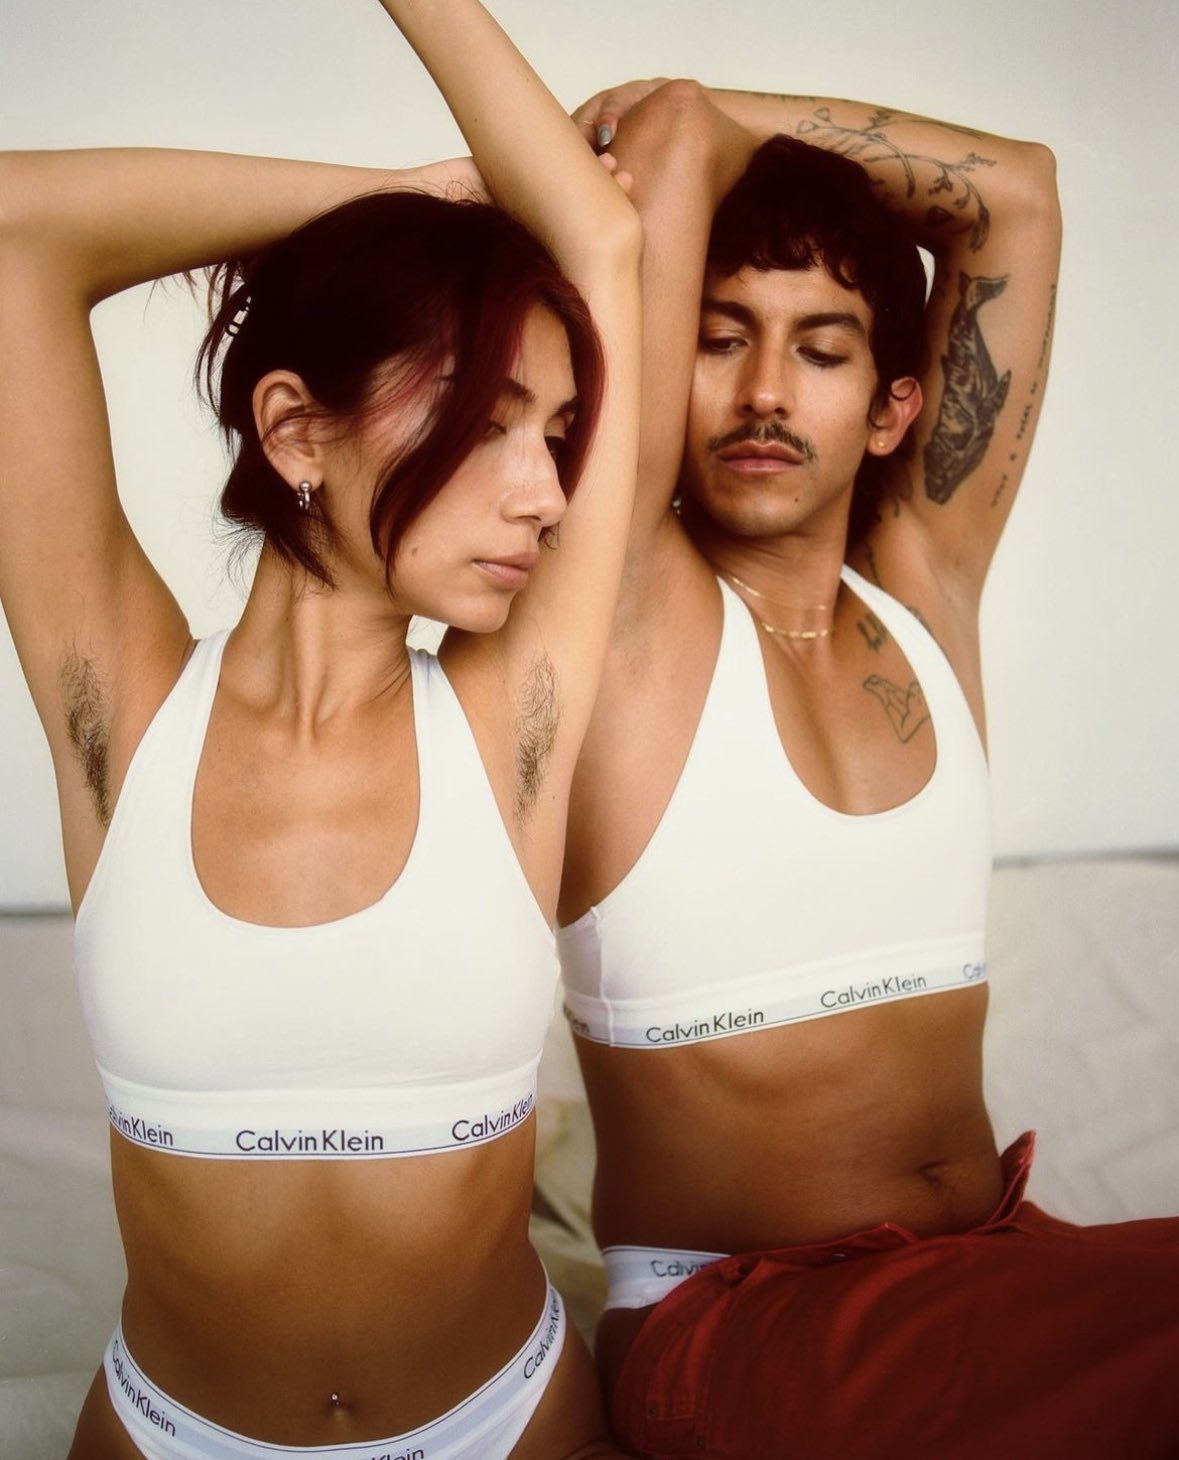 Oli London on X: Why does Calvin Klein continue to push ad campaigns with  men wearing bras? Why would such an iconic brand sign off on a campaign  like this that alienates